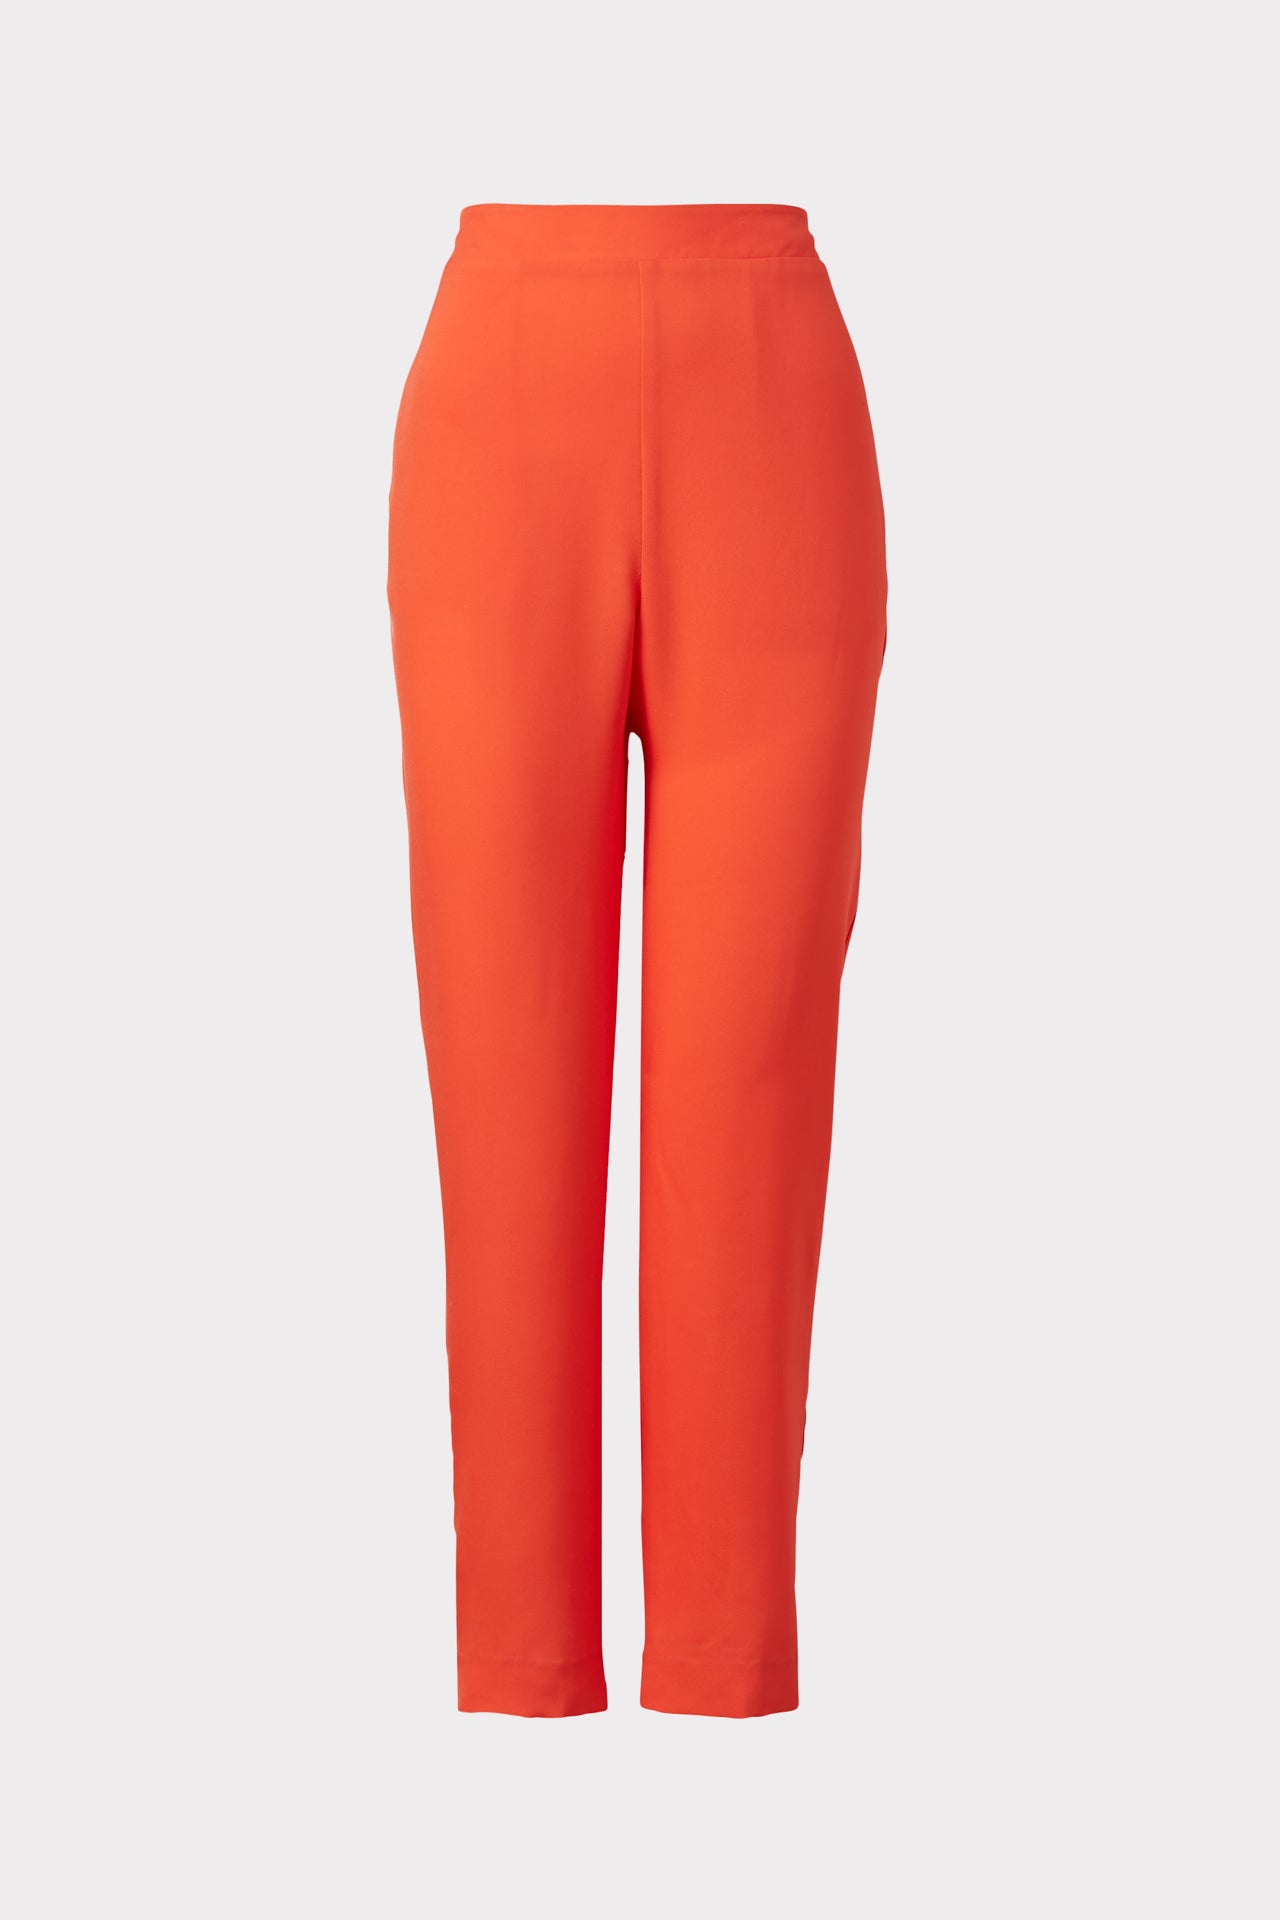 Milly Marcia Satin Pants In Coral